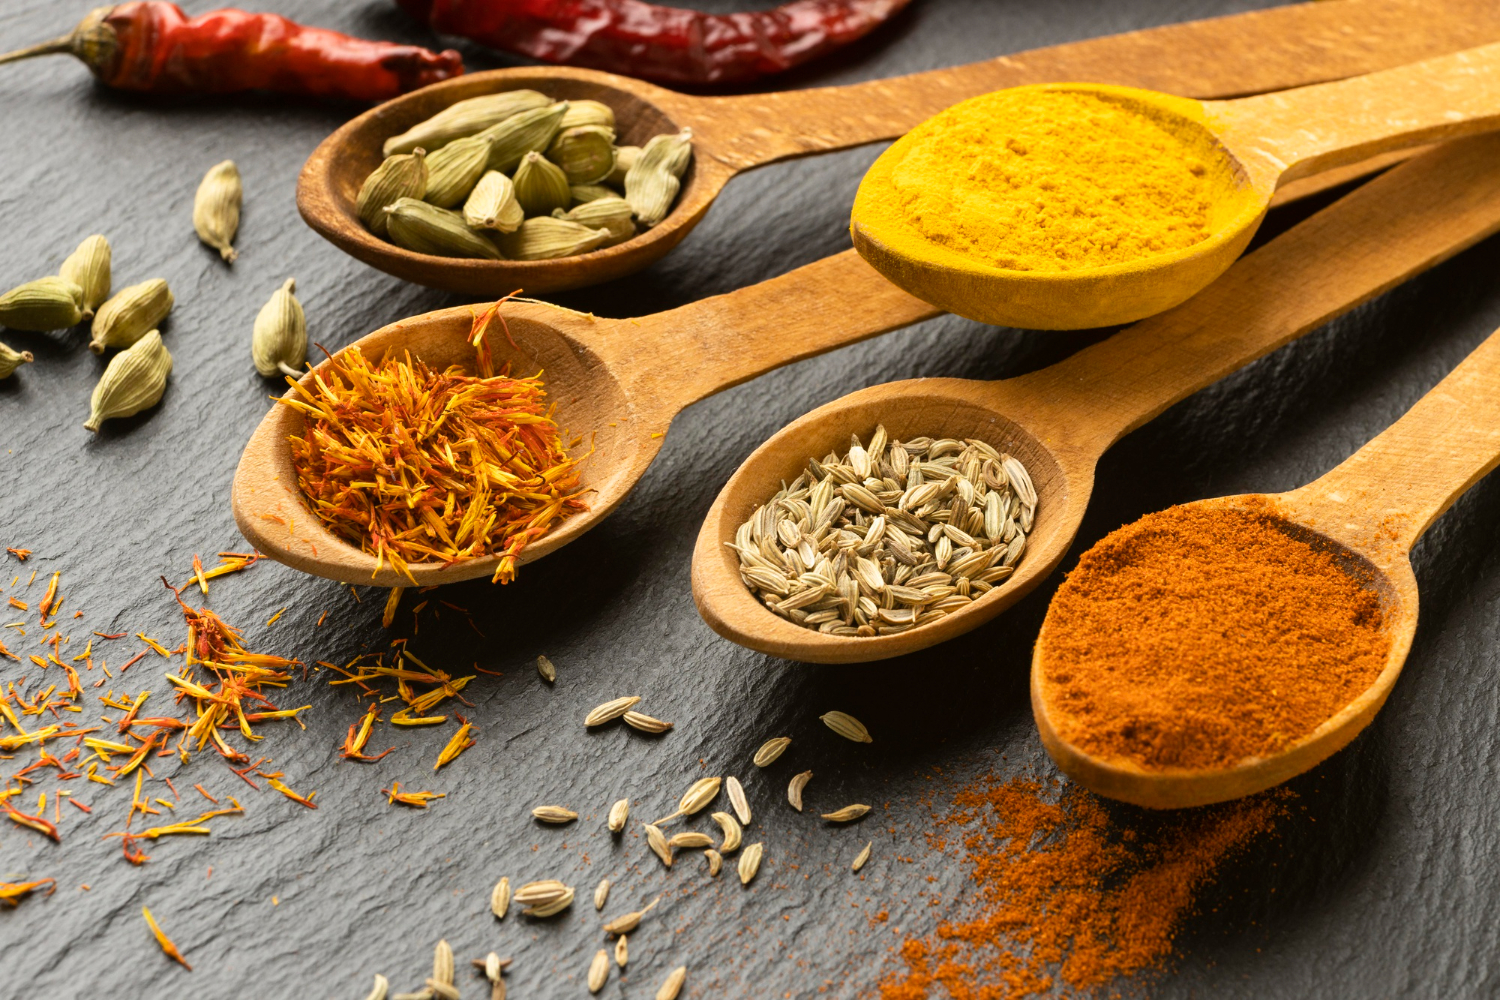 Spices products